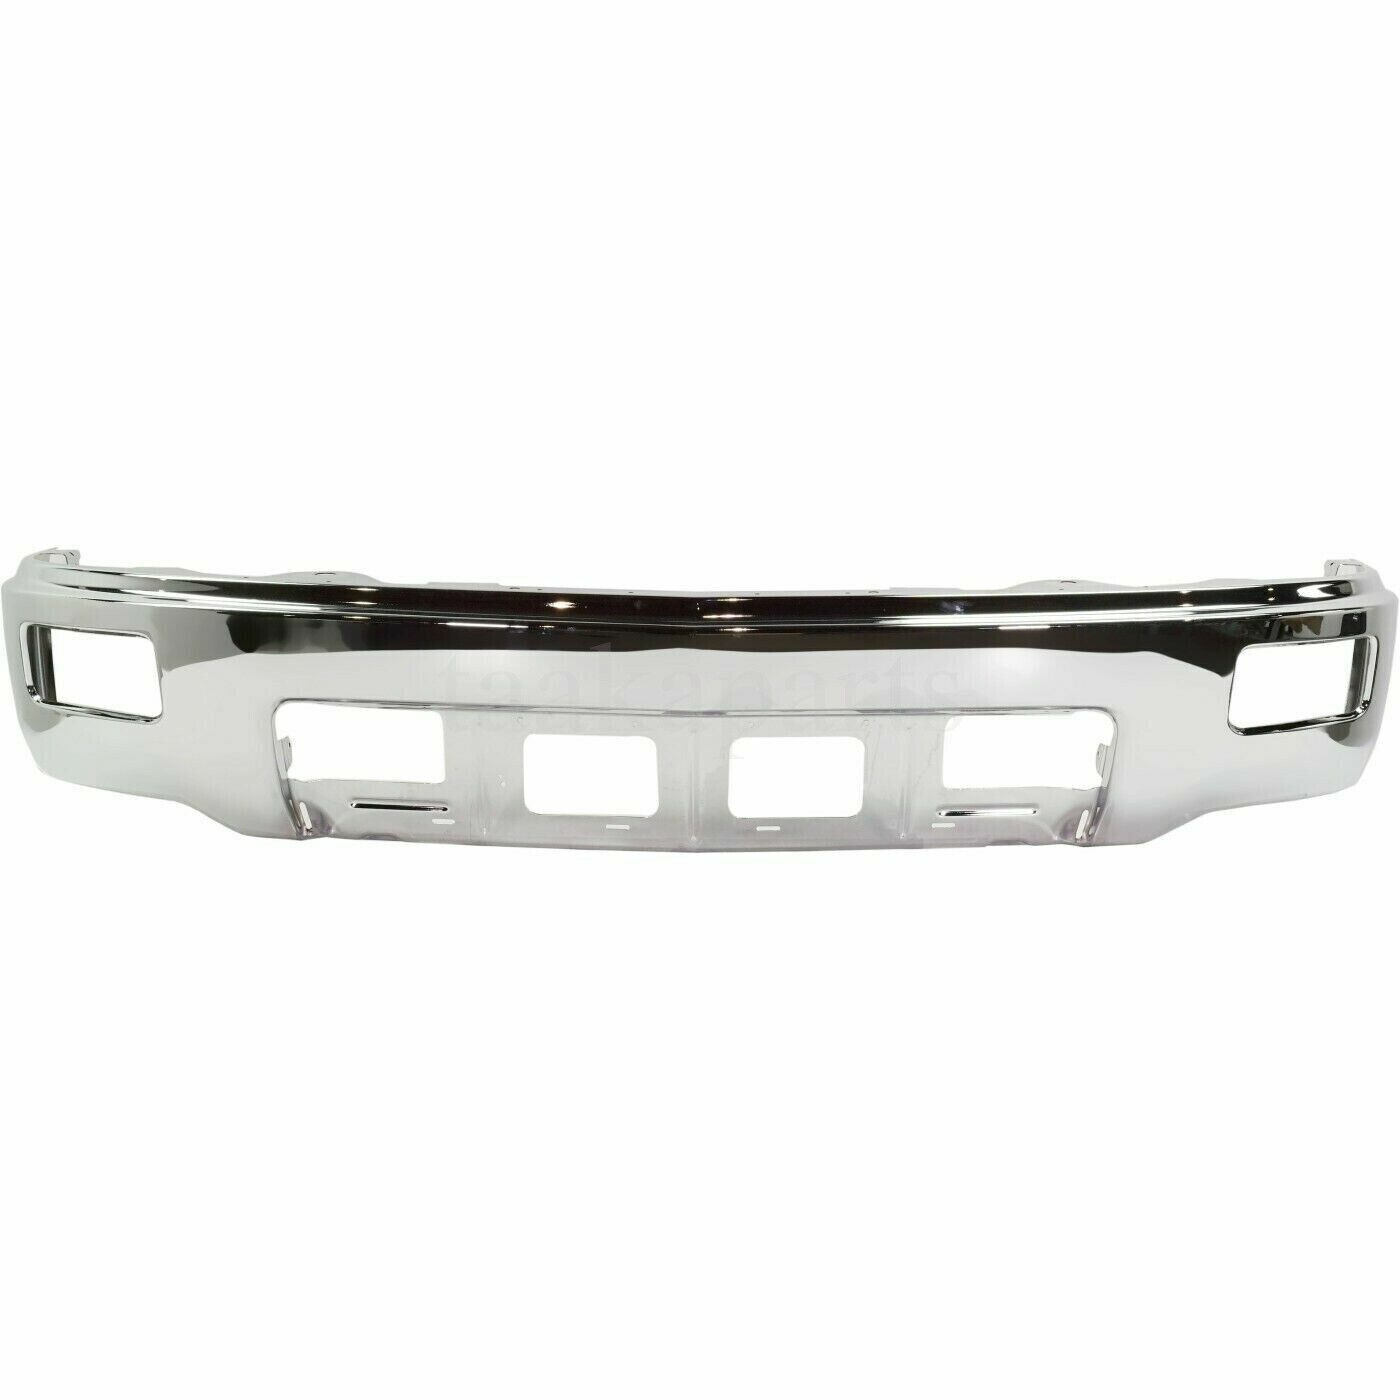 Front Bumper Cover Steel For 2014-2015 Chevrolet Silverado 1500 With Fogs Hole